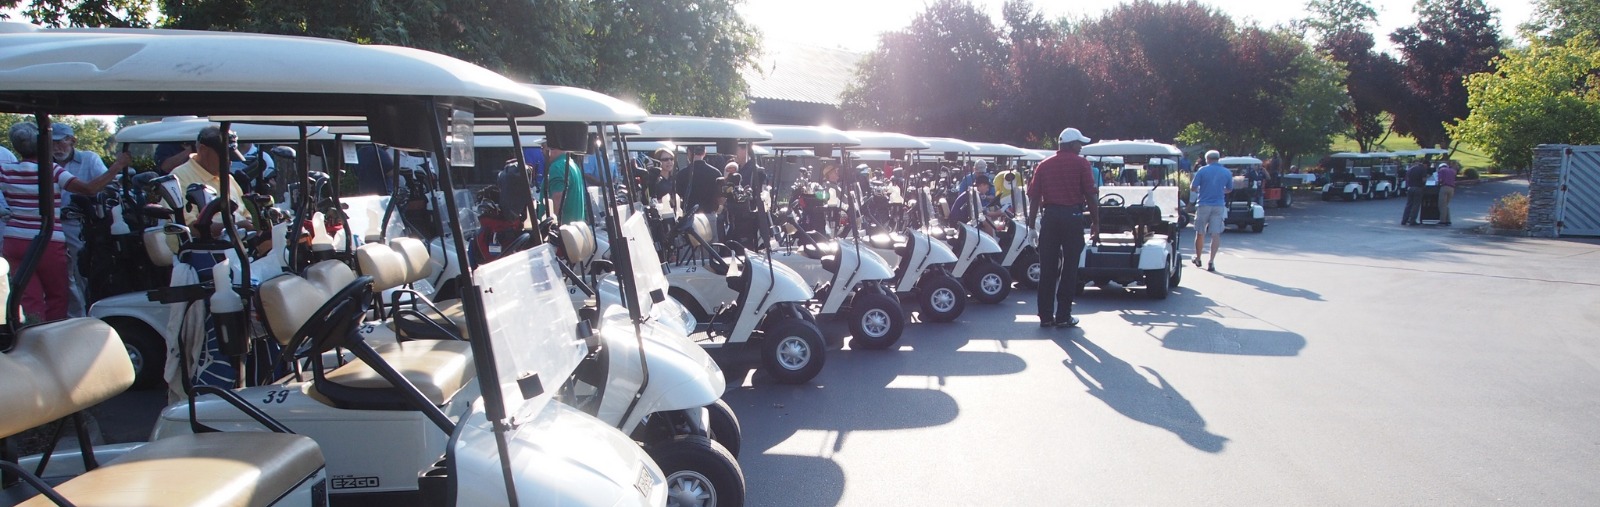 various golf carts lined up